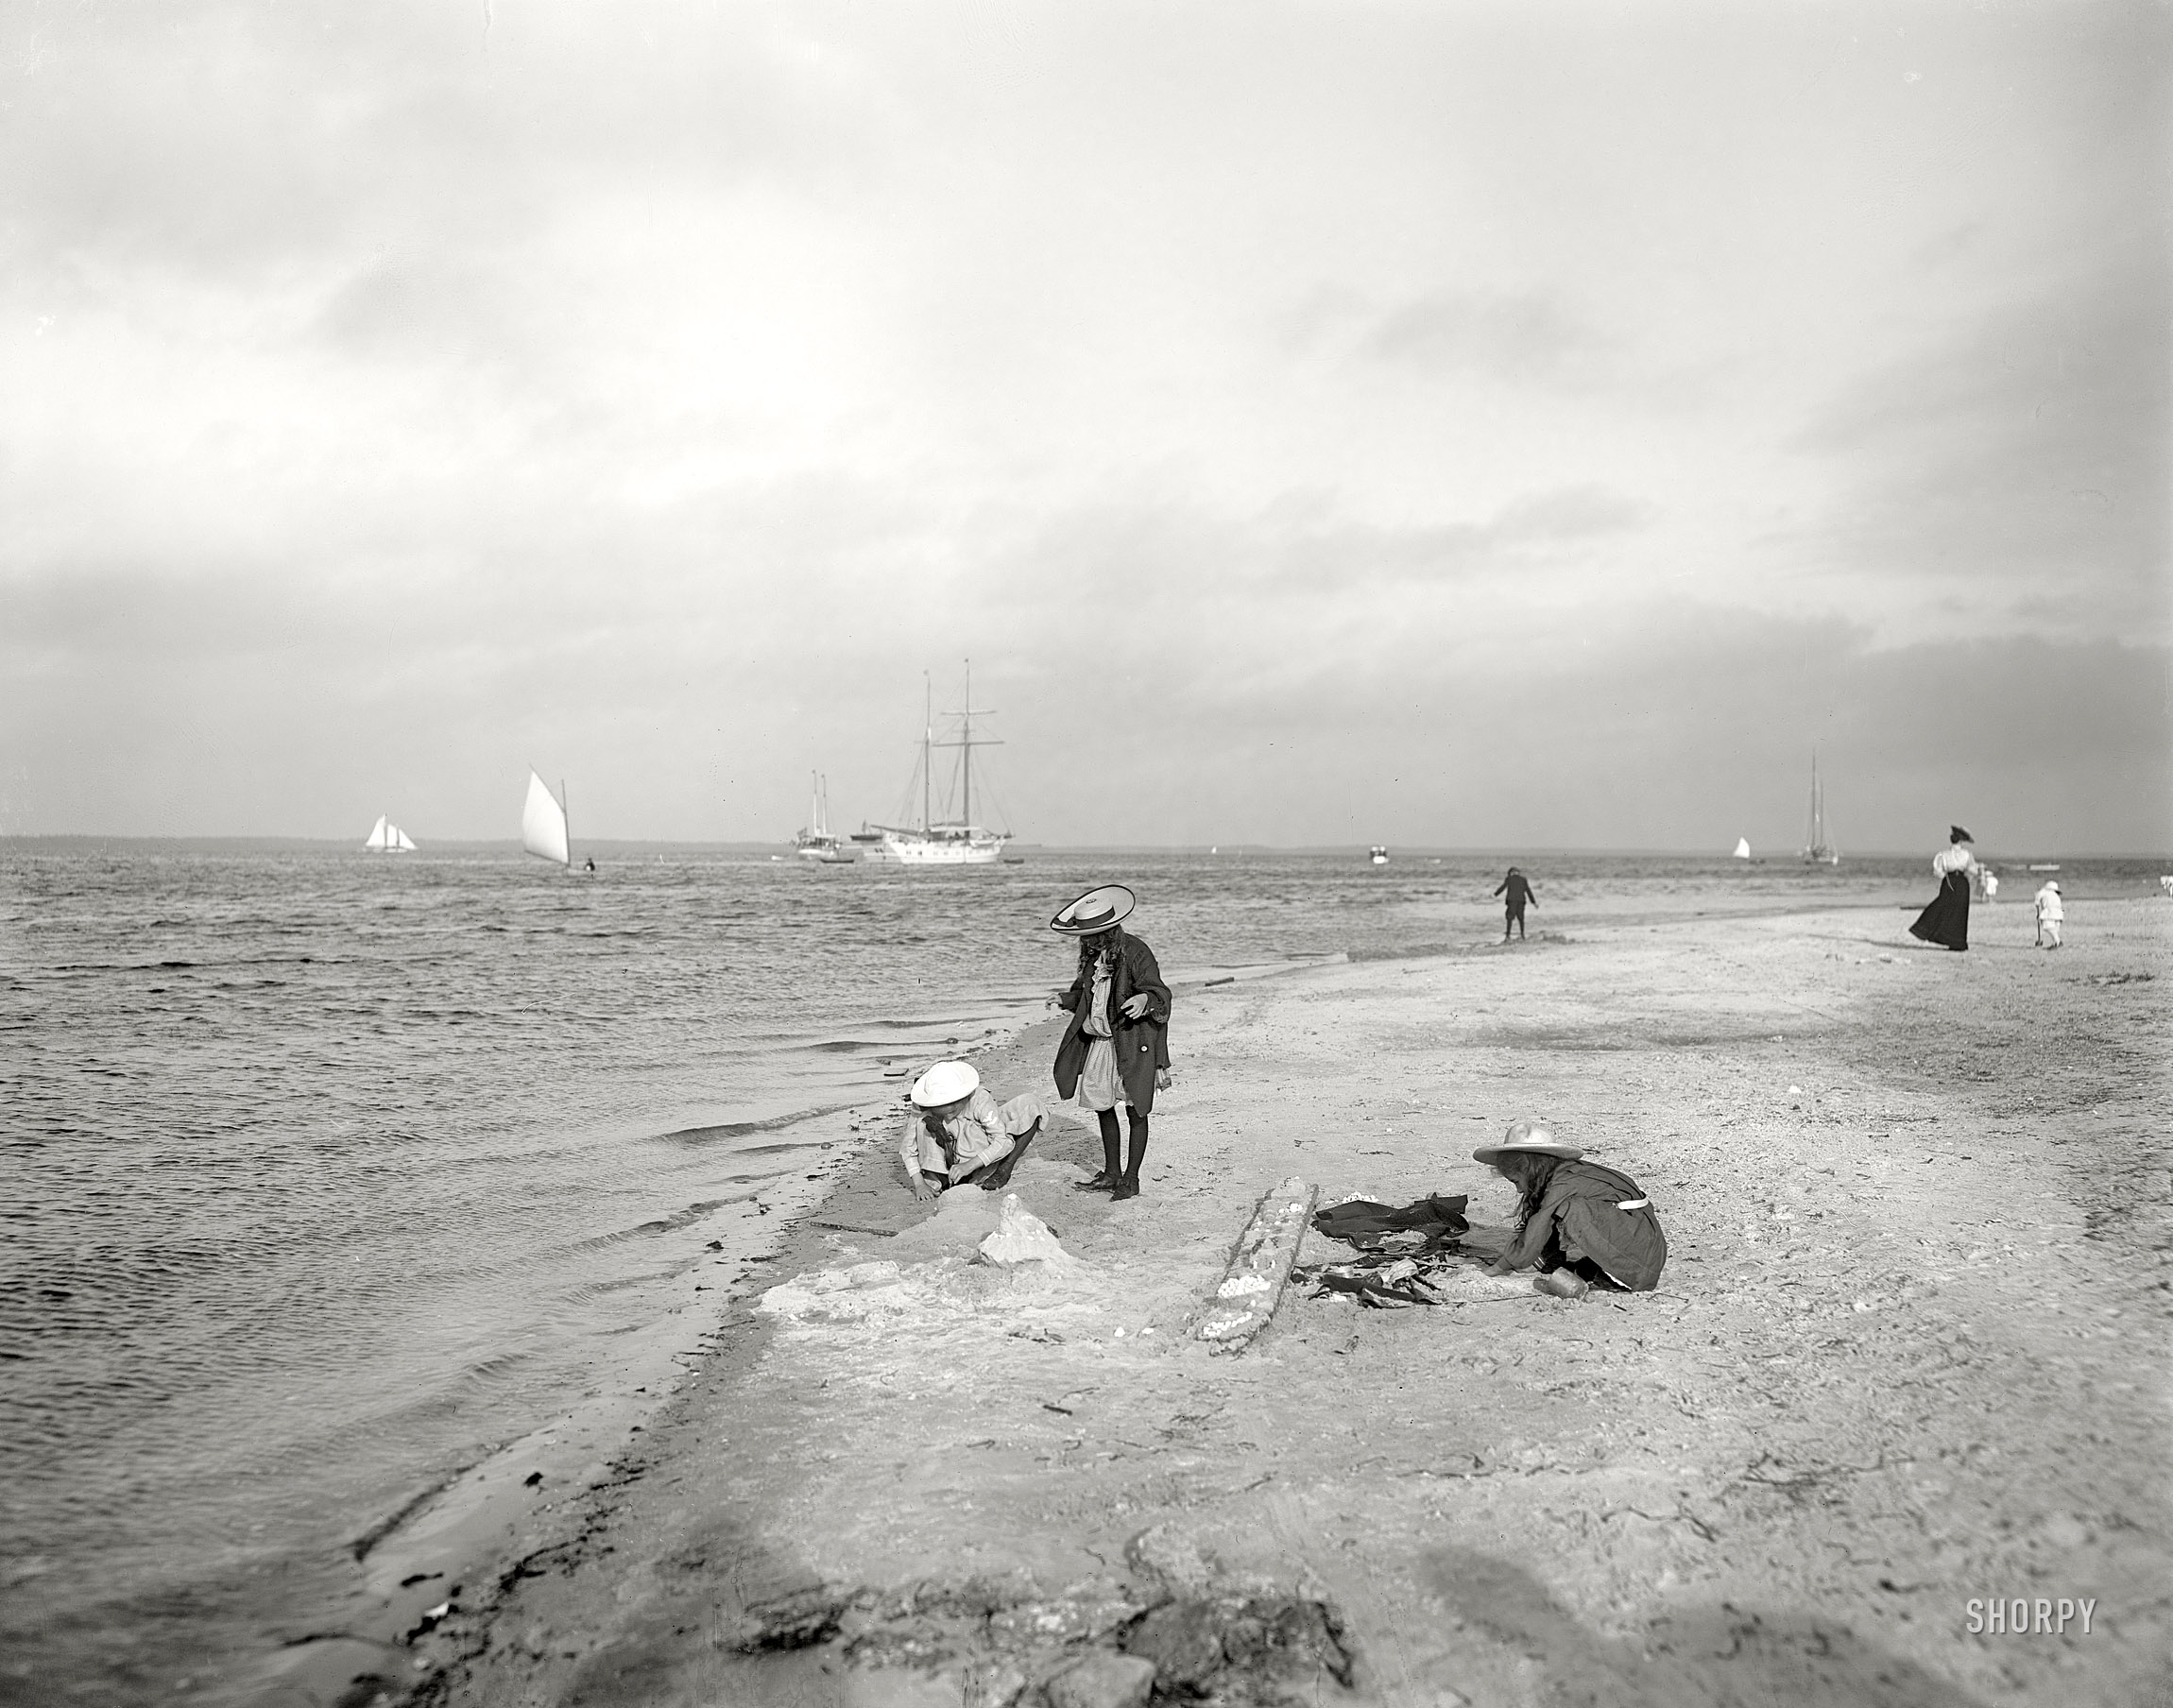 Miami, Florida, circa 1910. "The shores of Biscayne Bay." 8x10 inch dry plate glass negative, Detroit Publishing Company. View full size.